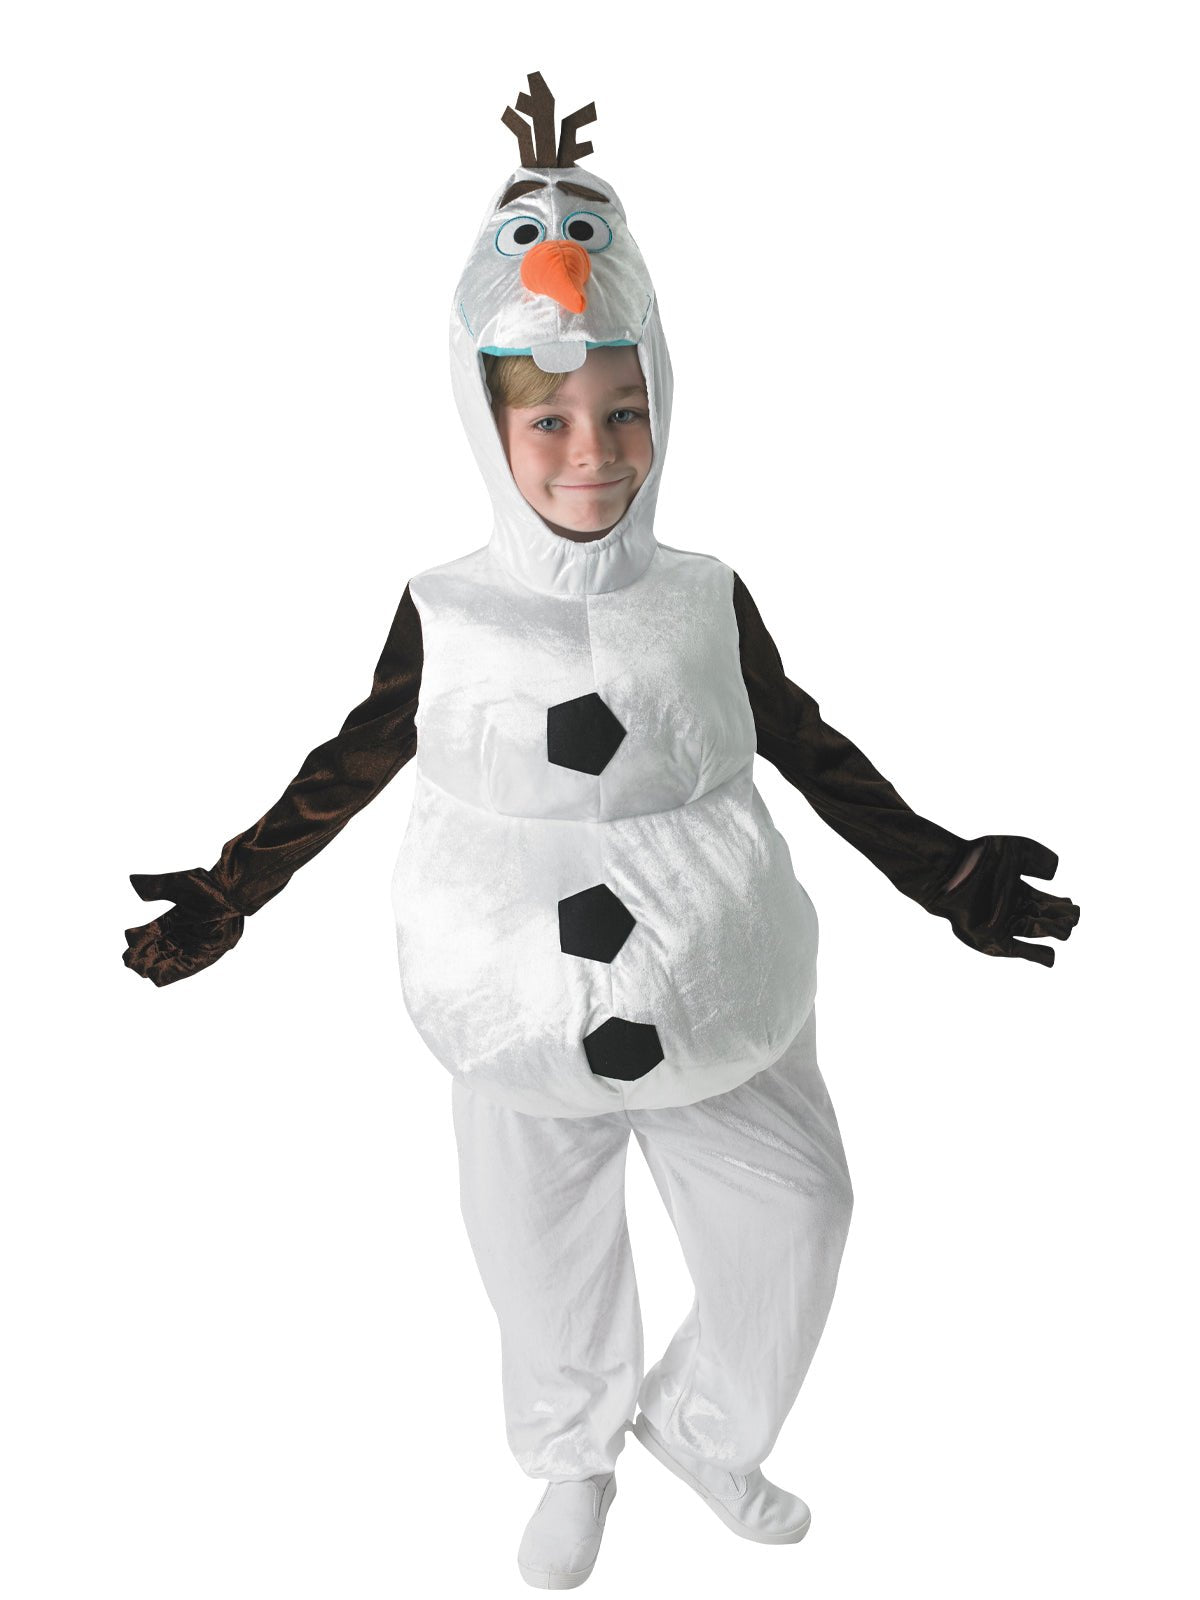 Olaf Costume for Children - Officially Licensed Disney Product